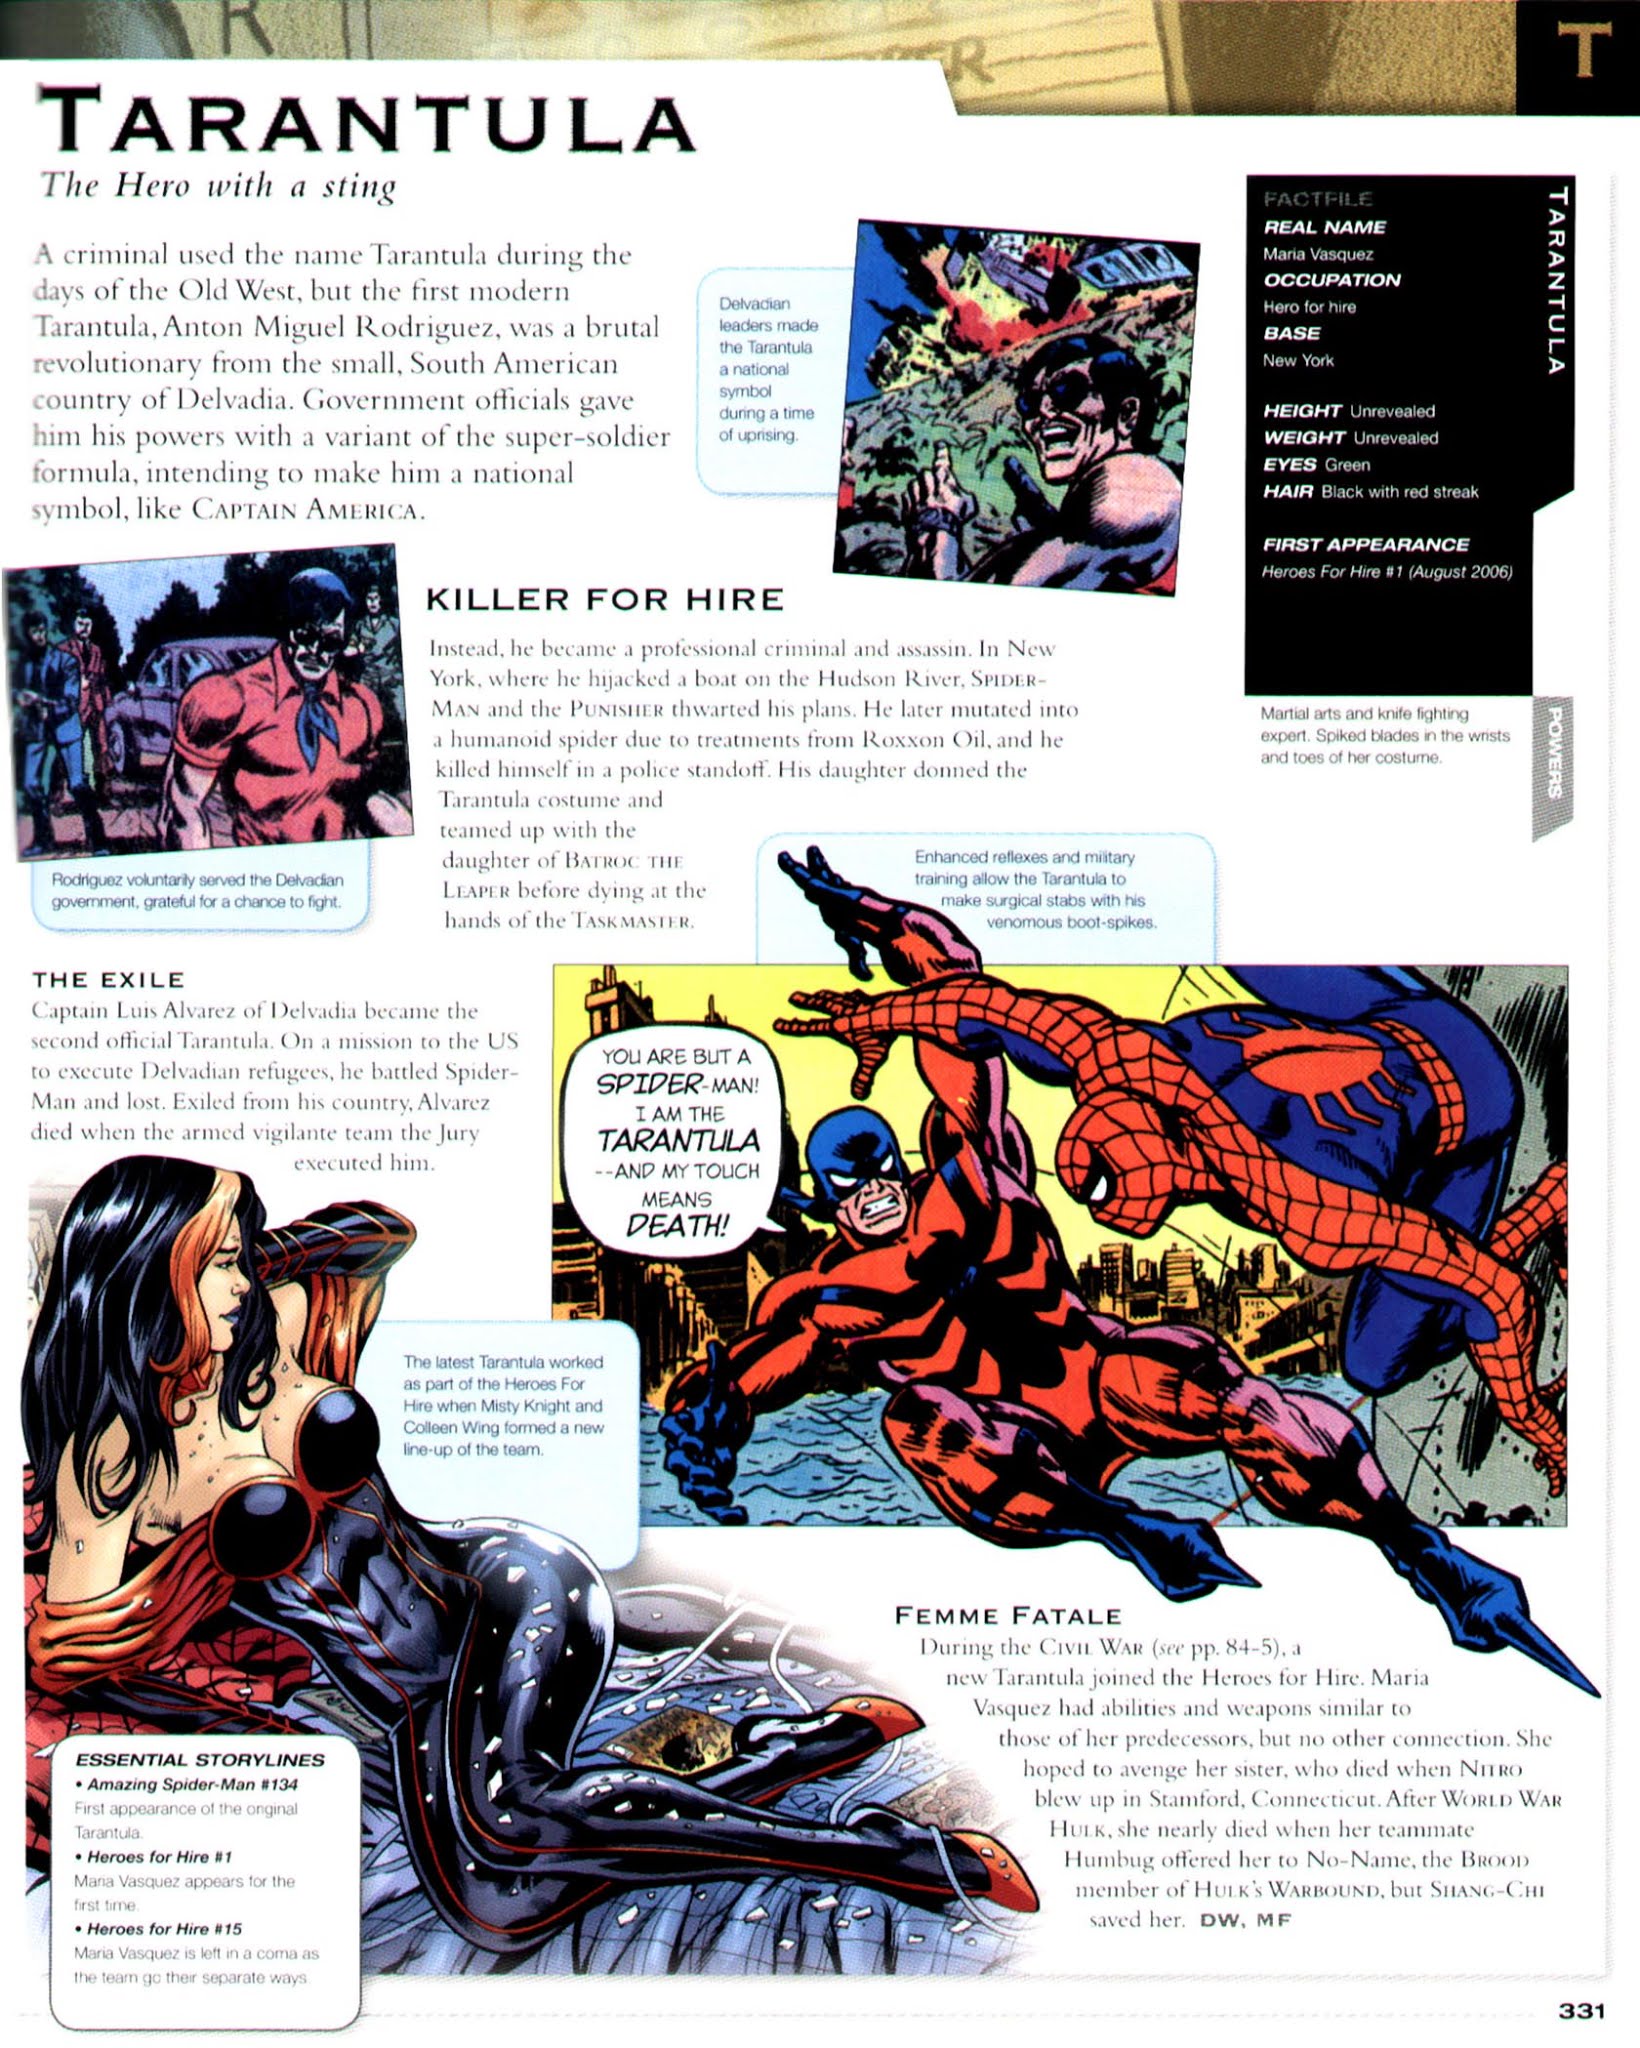 Read online The Marvel Encyclopedia comic -  Issue # TPB 2 (Part 4) - 2